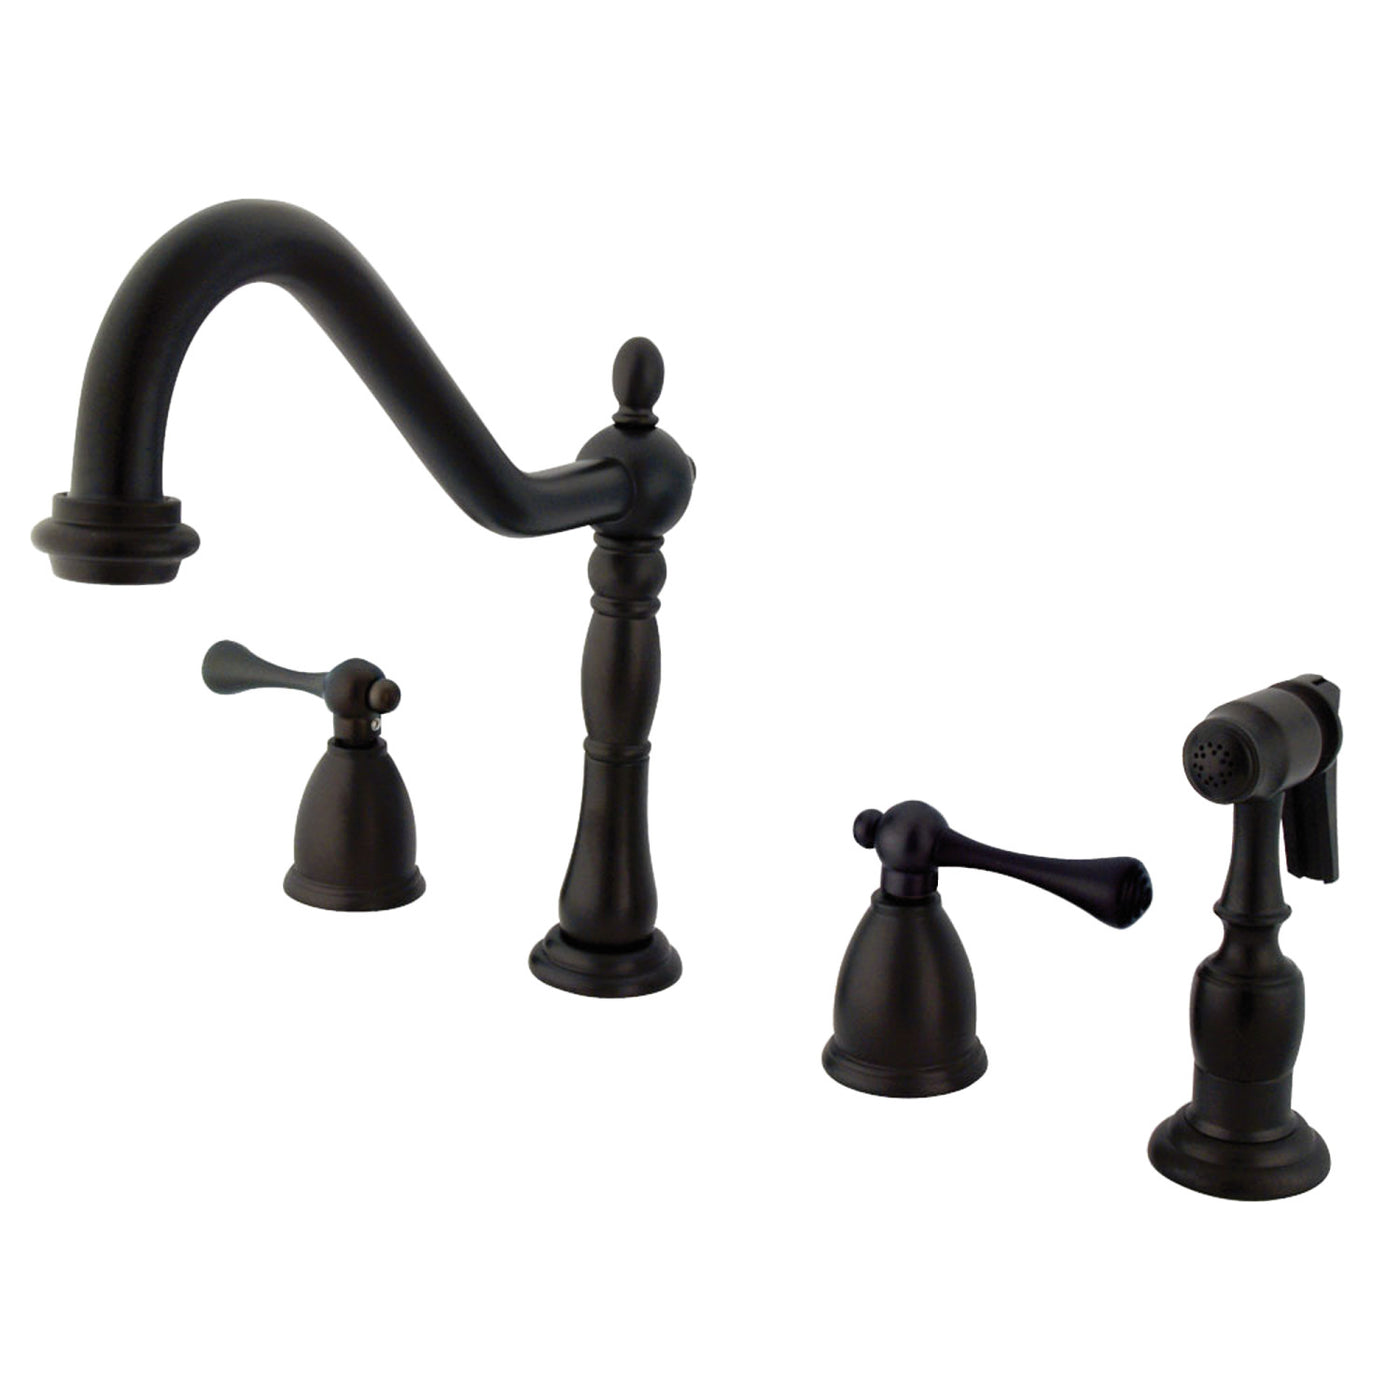 Elements of Design EB1795BLBS Widespread Kitchen Faucet with Brass Sprayer, Oil Rubbed Bronze